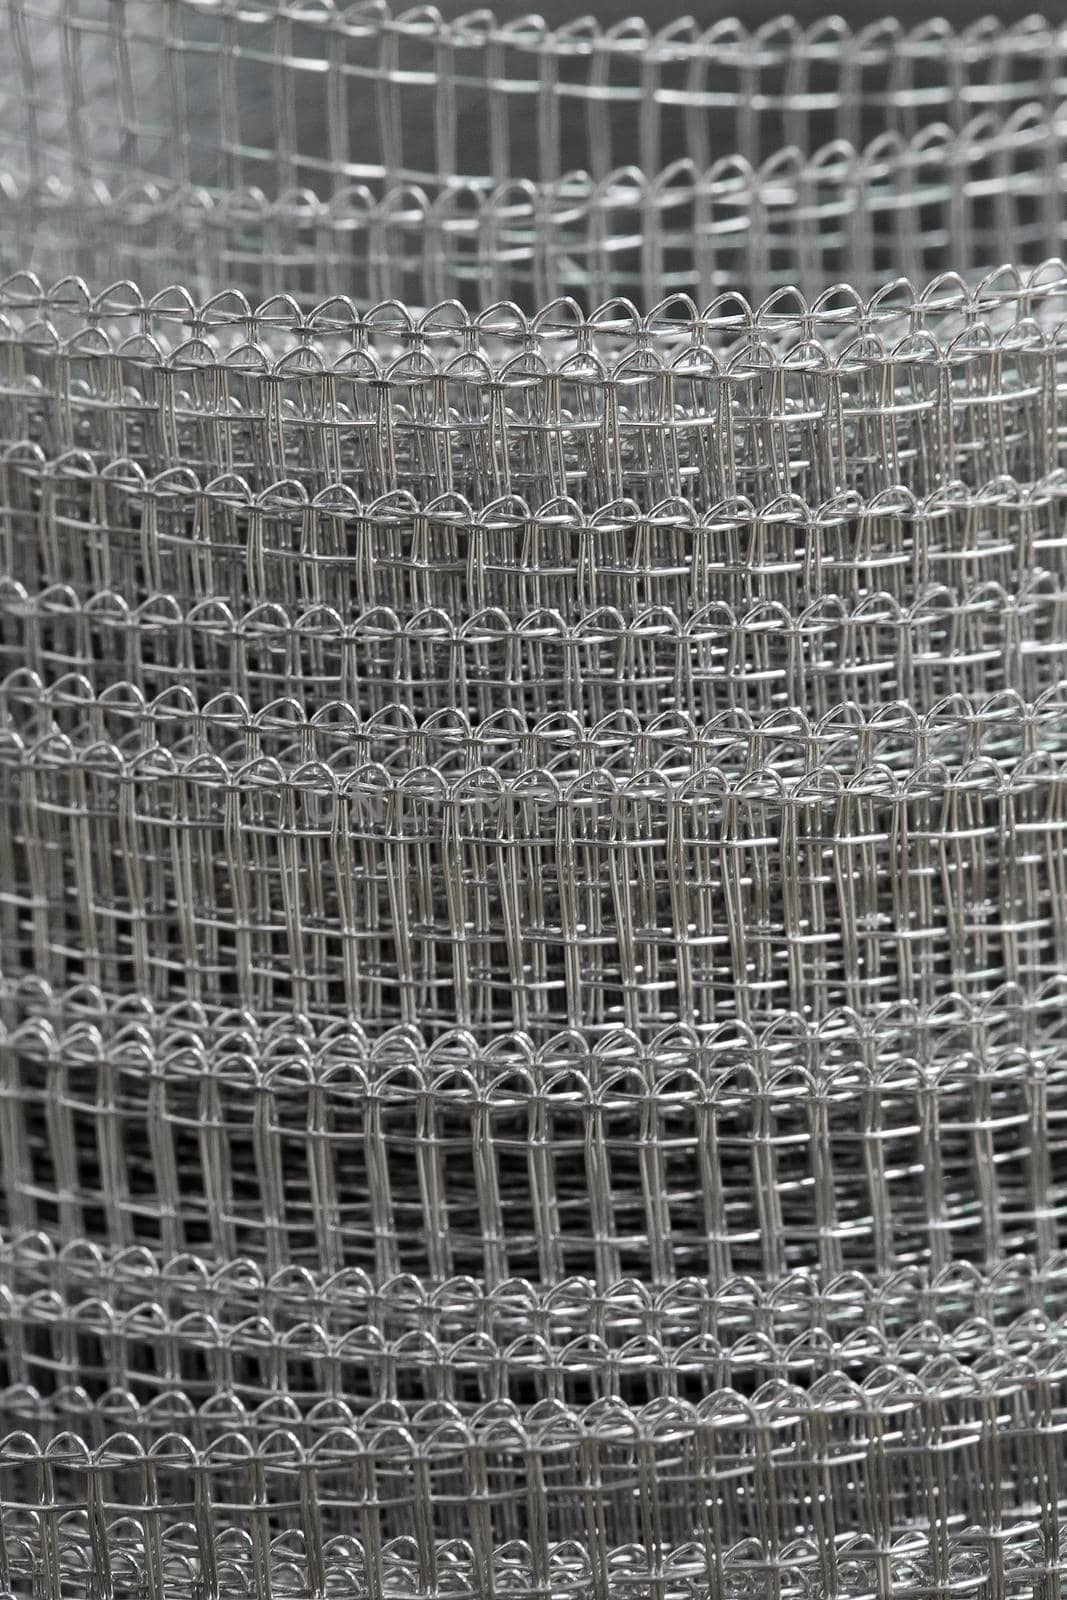 Background. Roll of a metal grid close up.